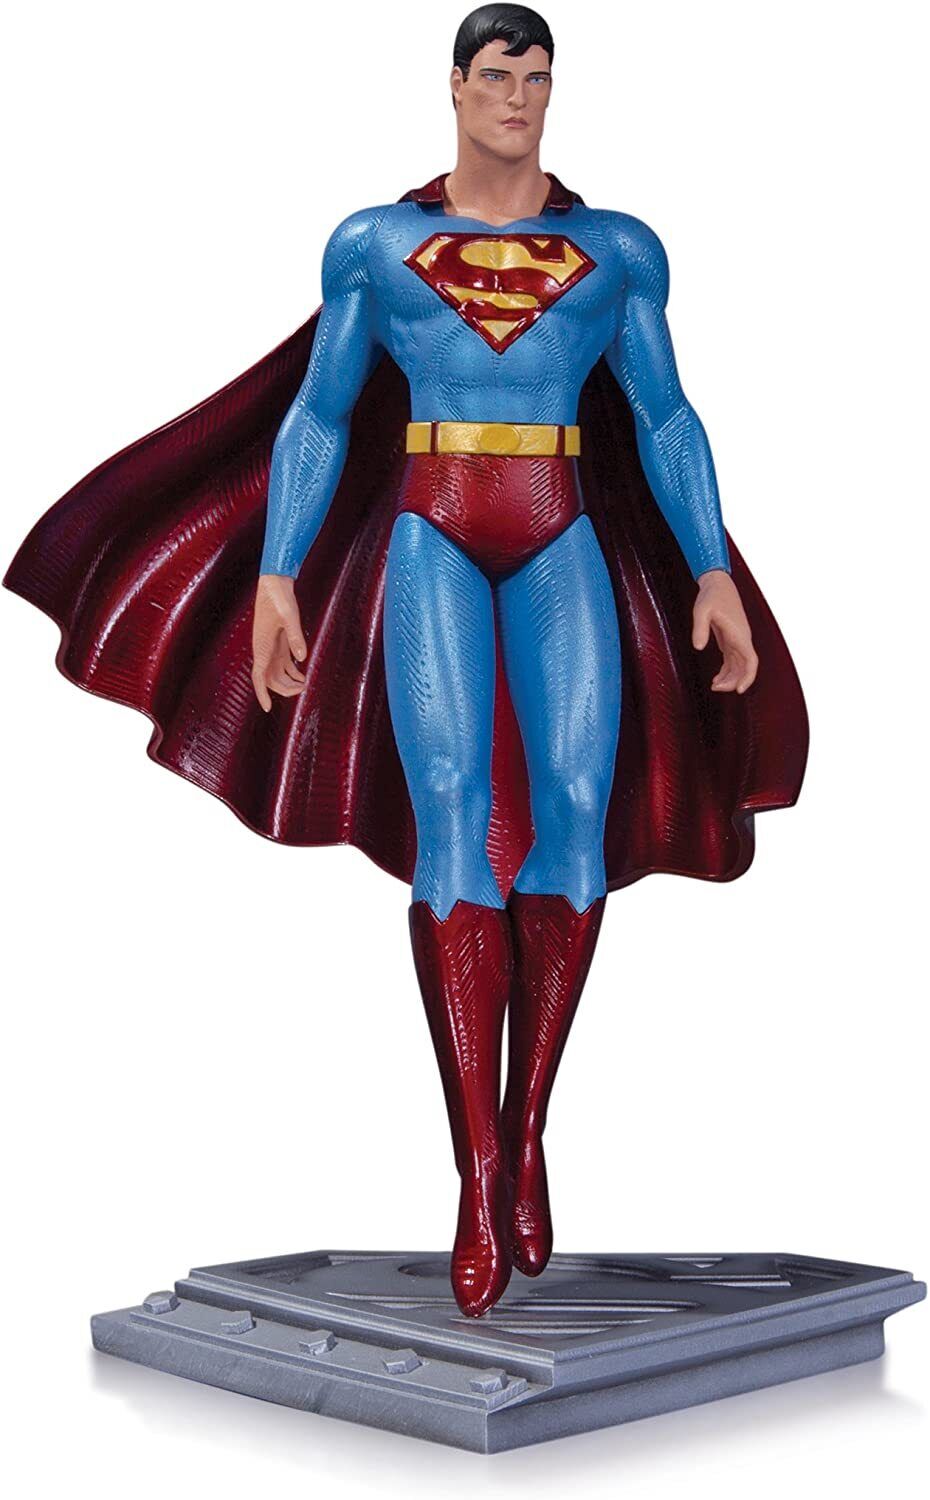 Superman The Man of Steel Statue Moebius DC Collectibles SEALED